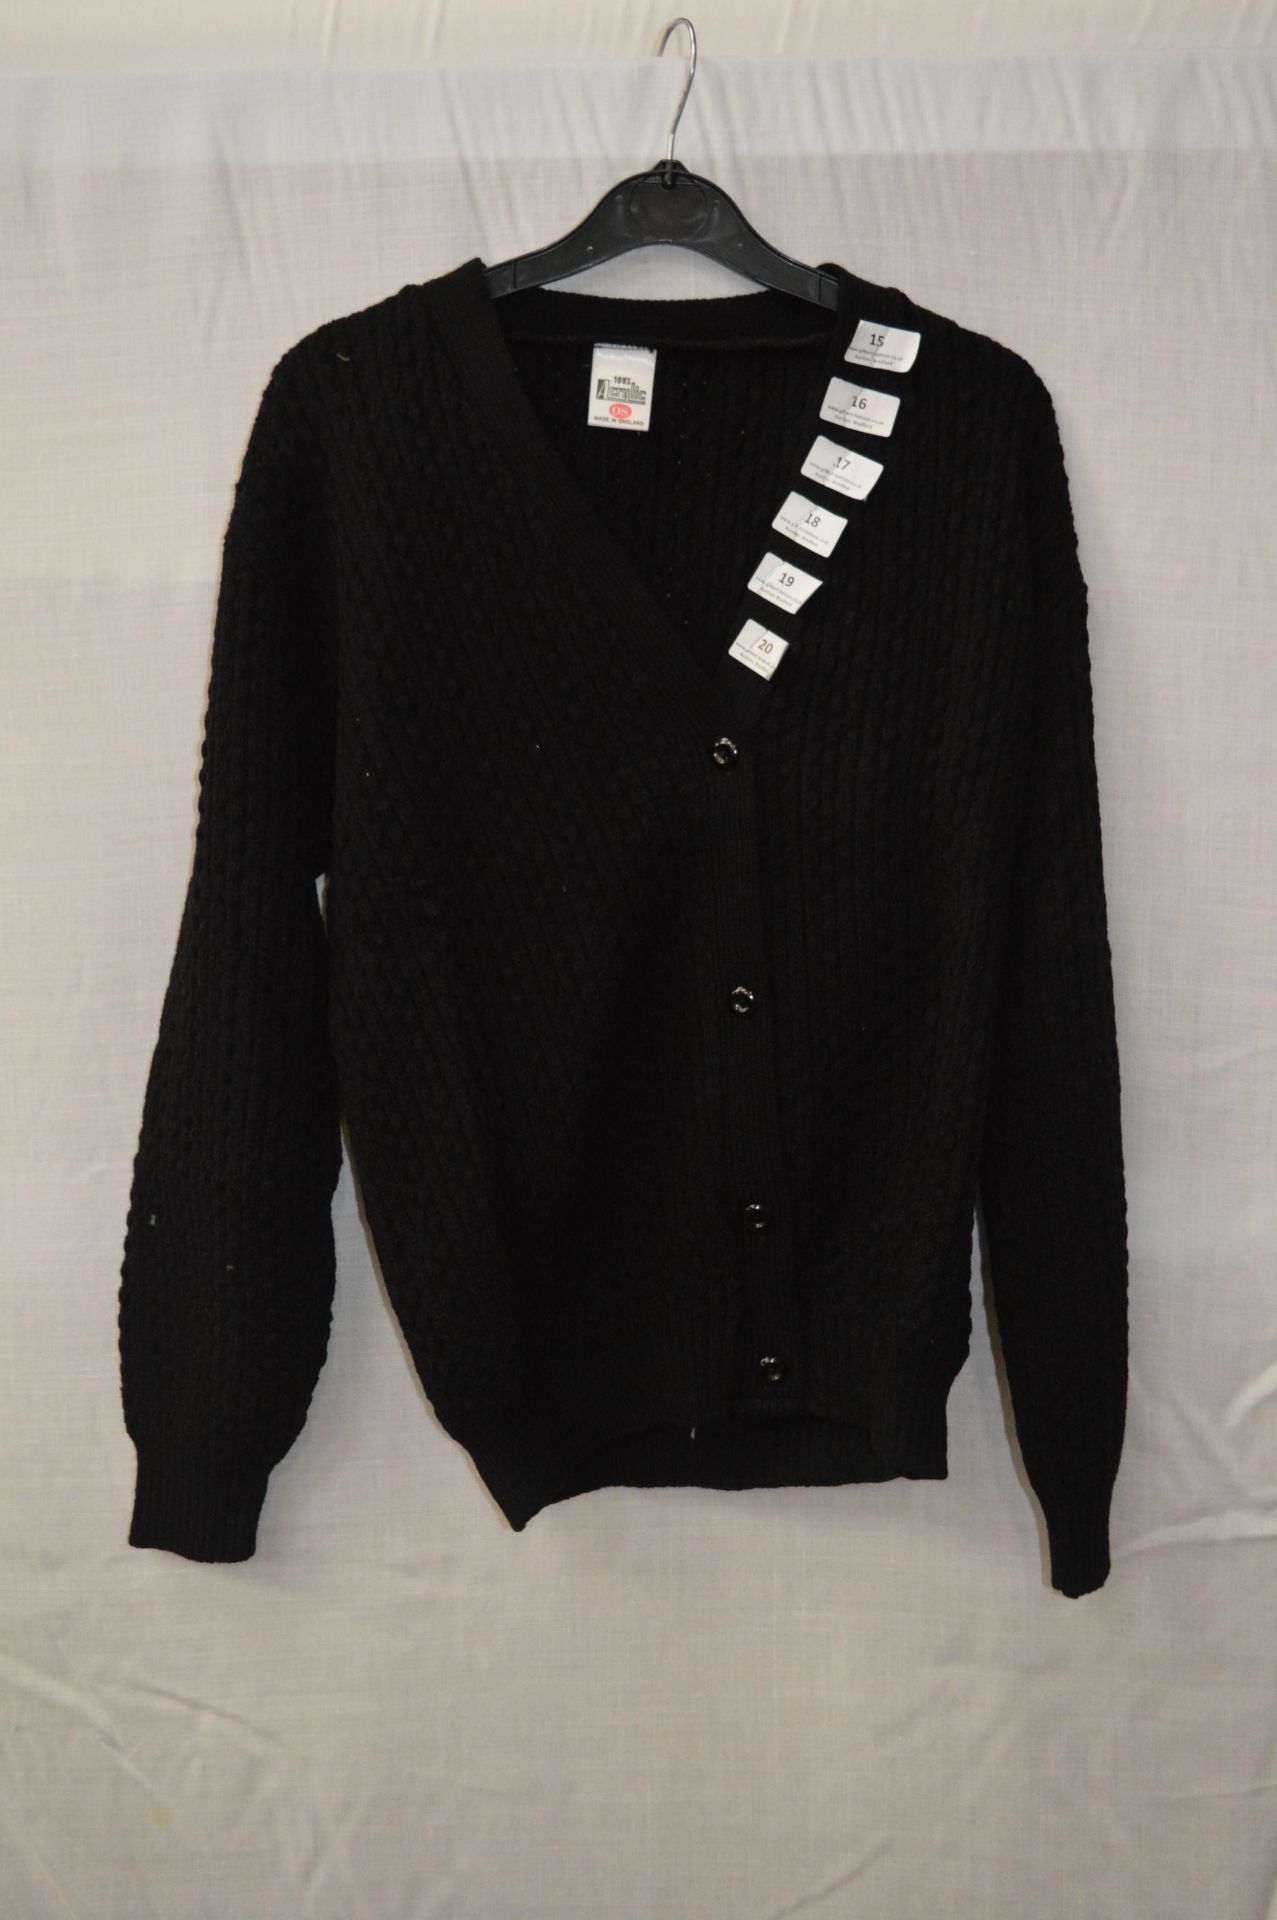 Box of Five Black Knitted Cardigans